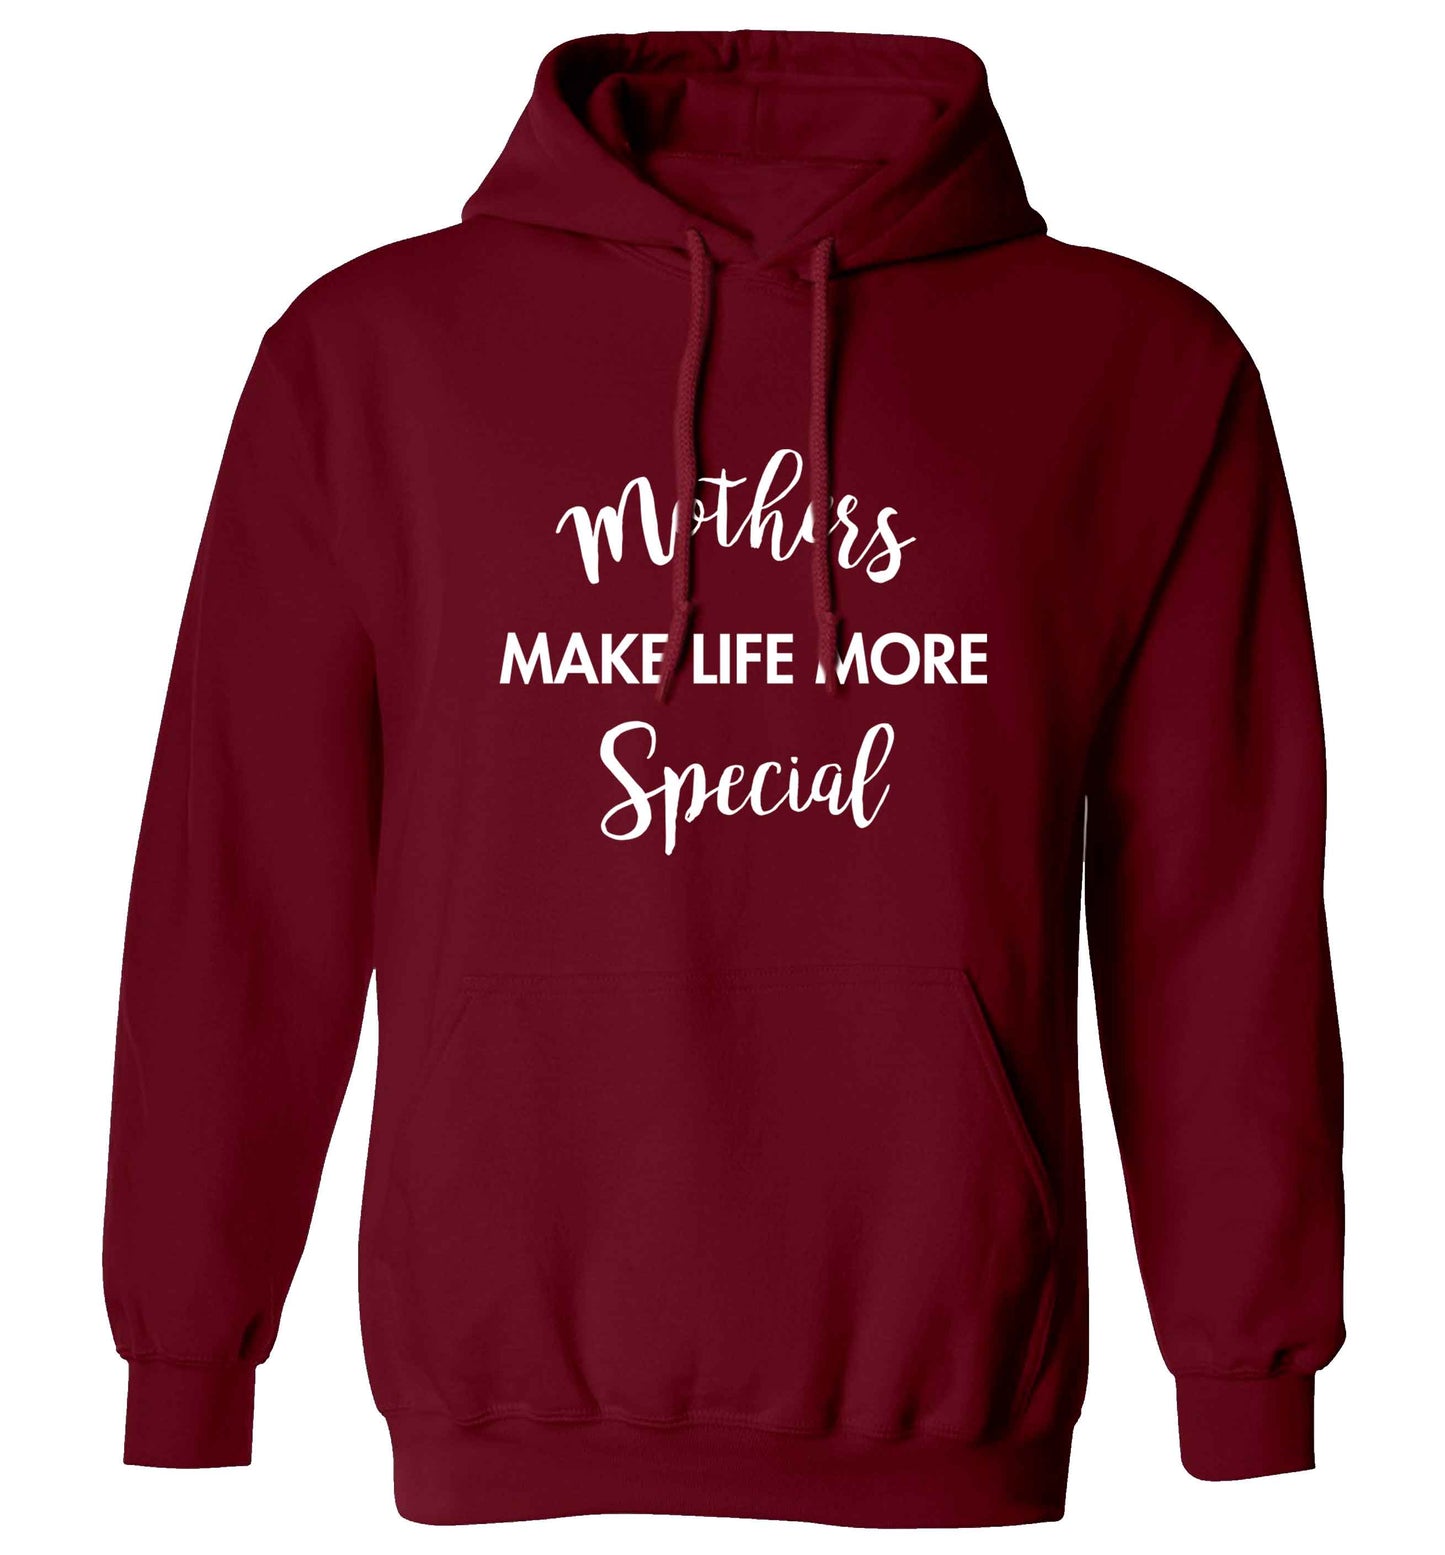 Mother's make life more special adults unisex maroon hoodie 2XL